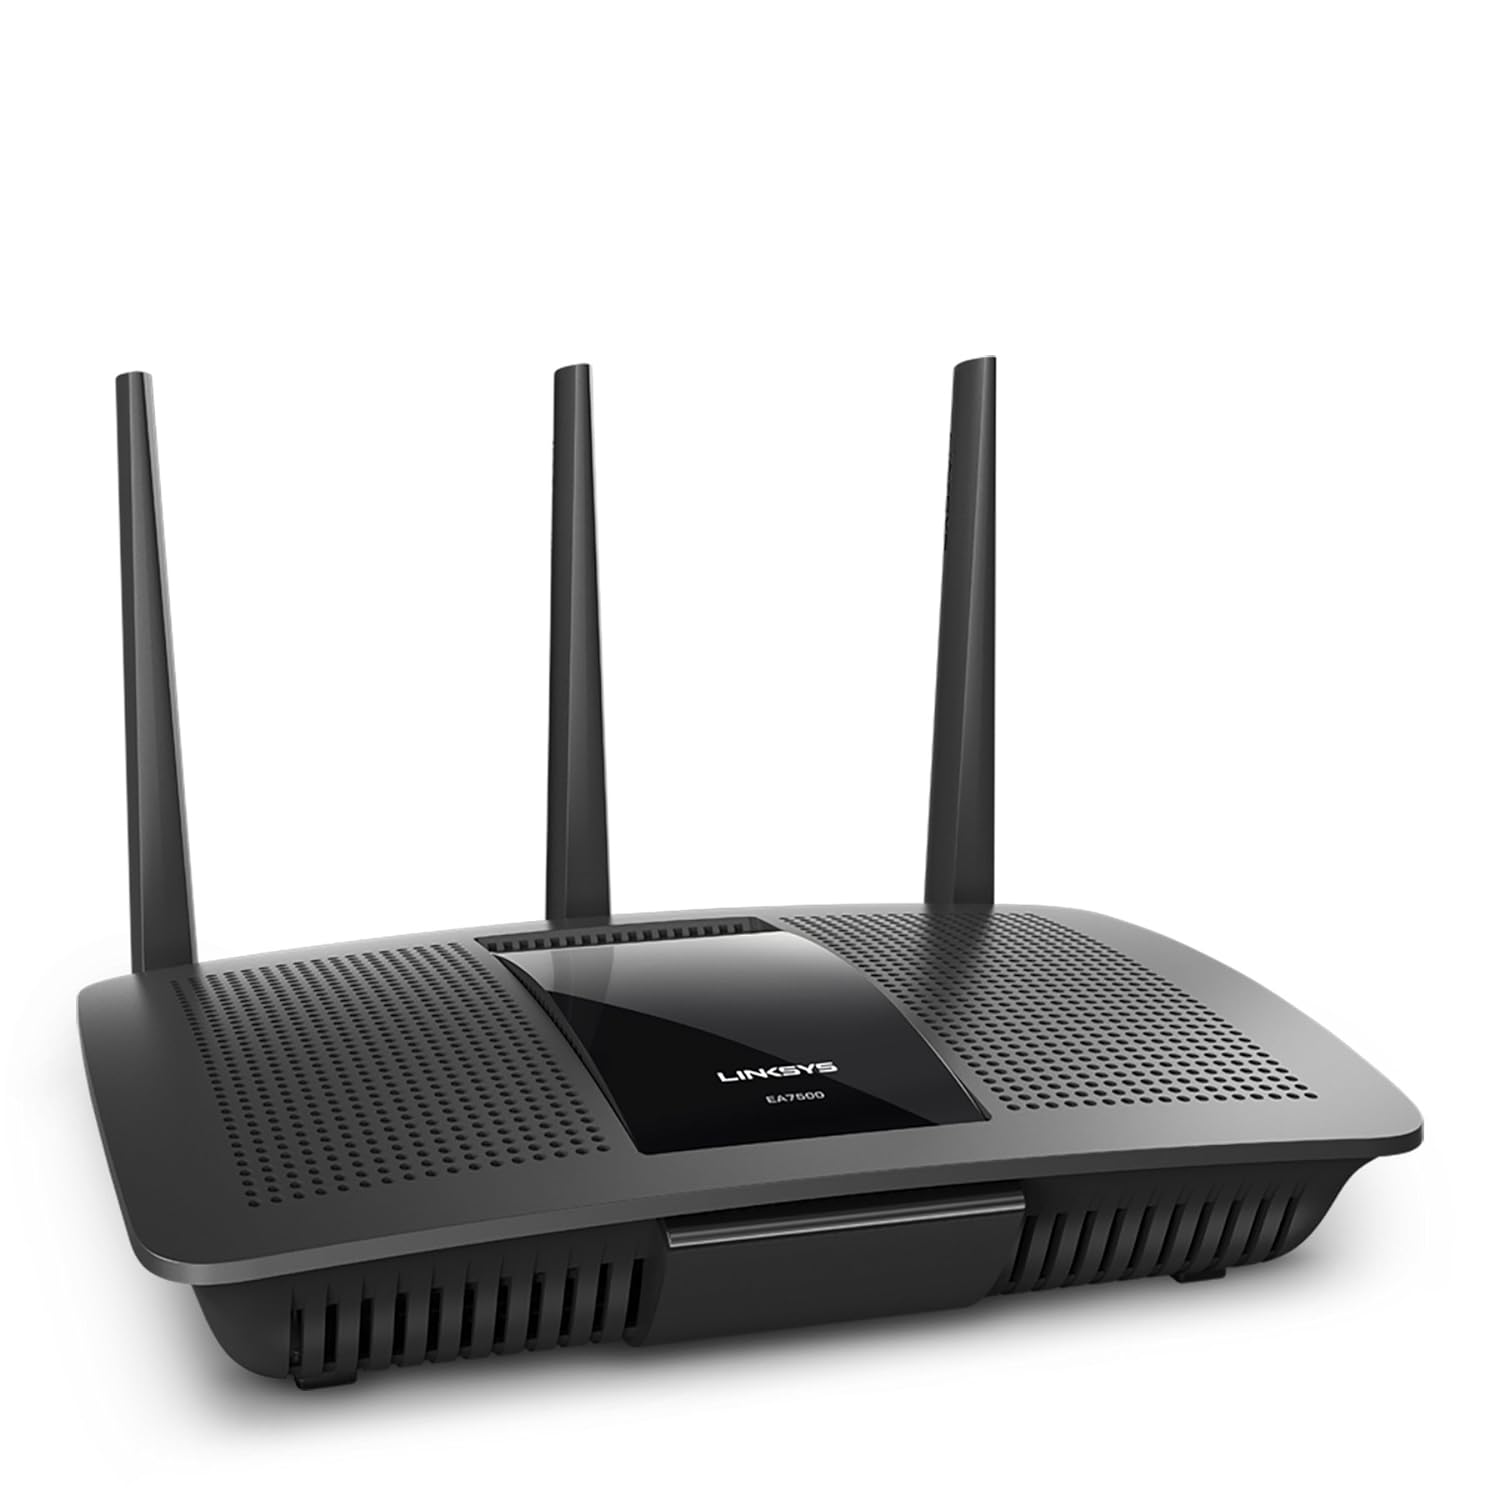 Linksys Max-Stream EA7500 AC1900 Dual-Band Wireless Router (Black)